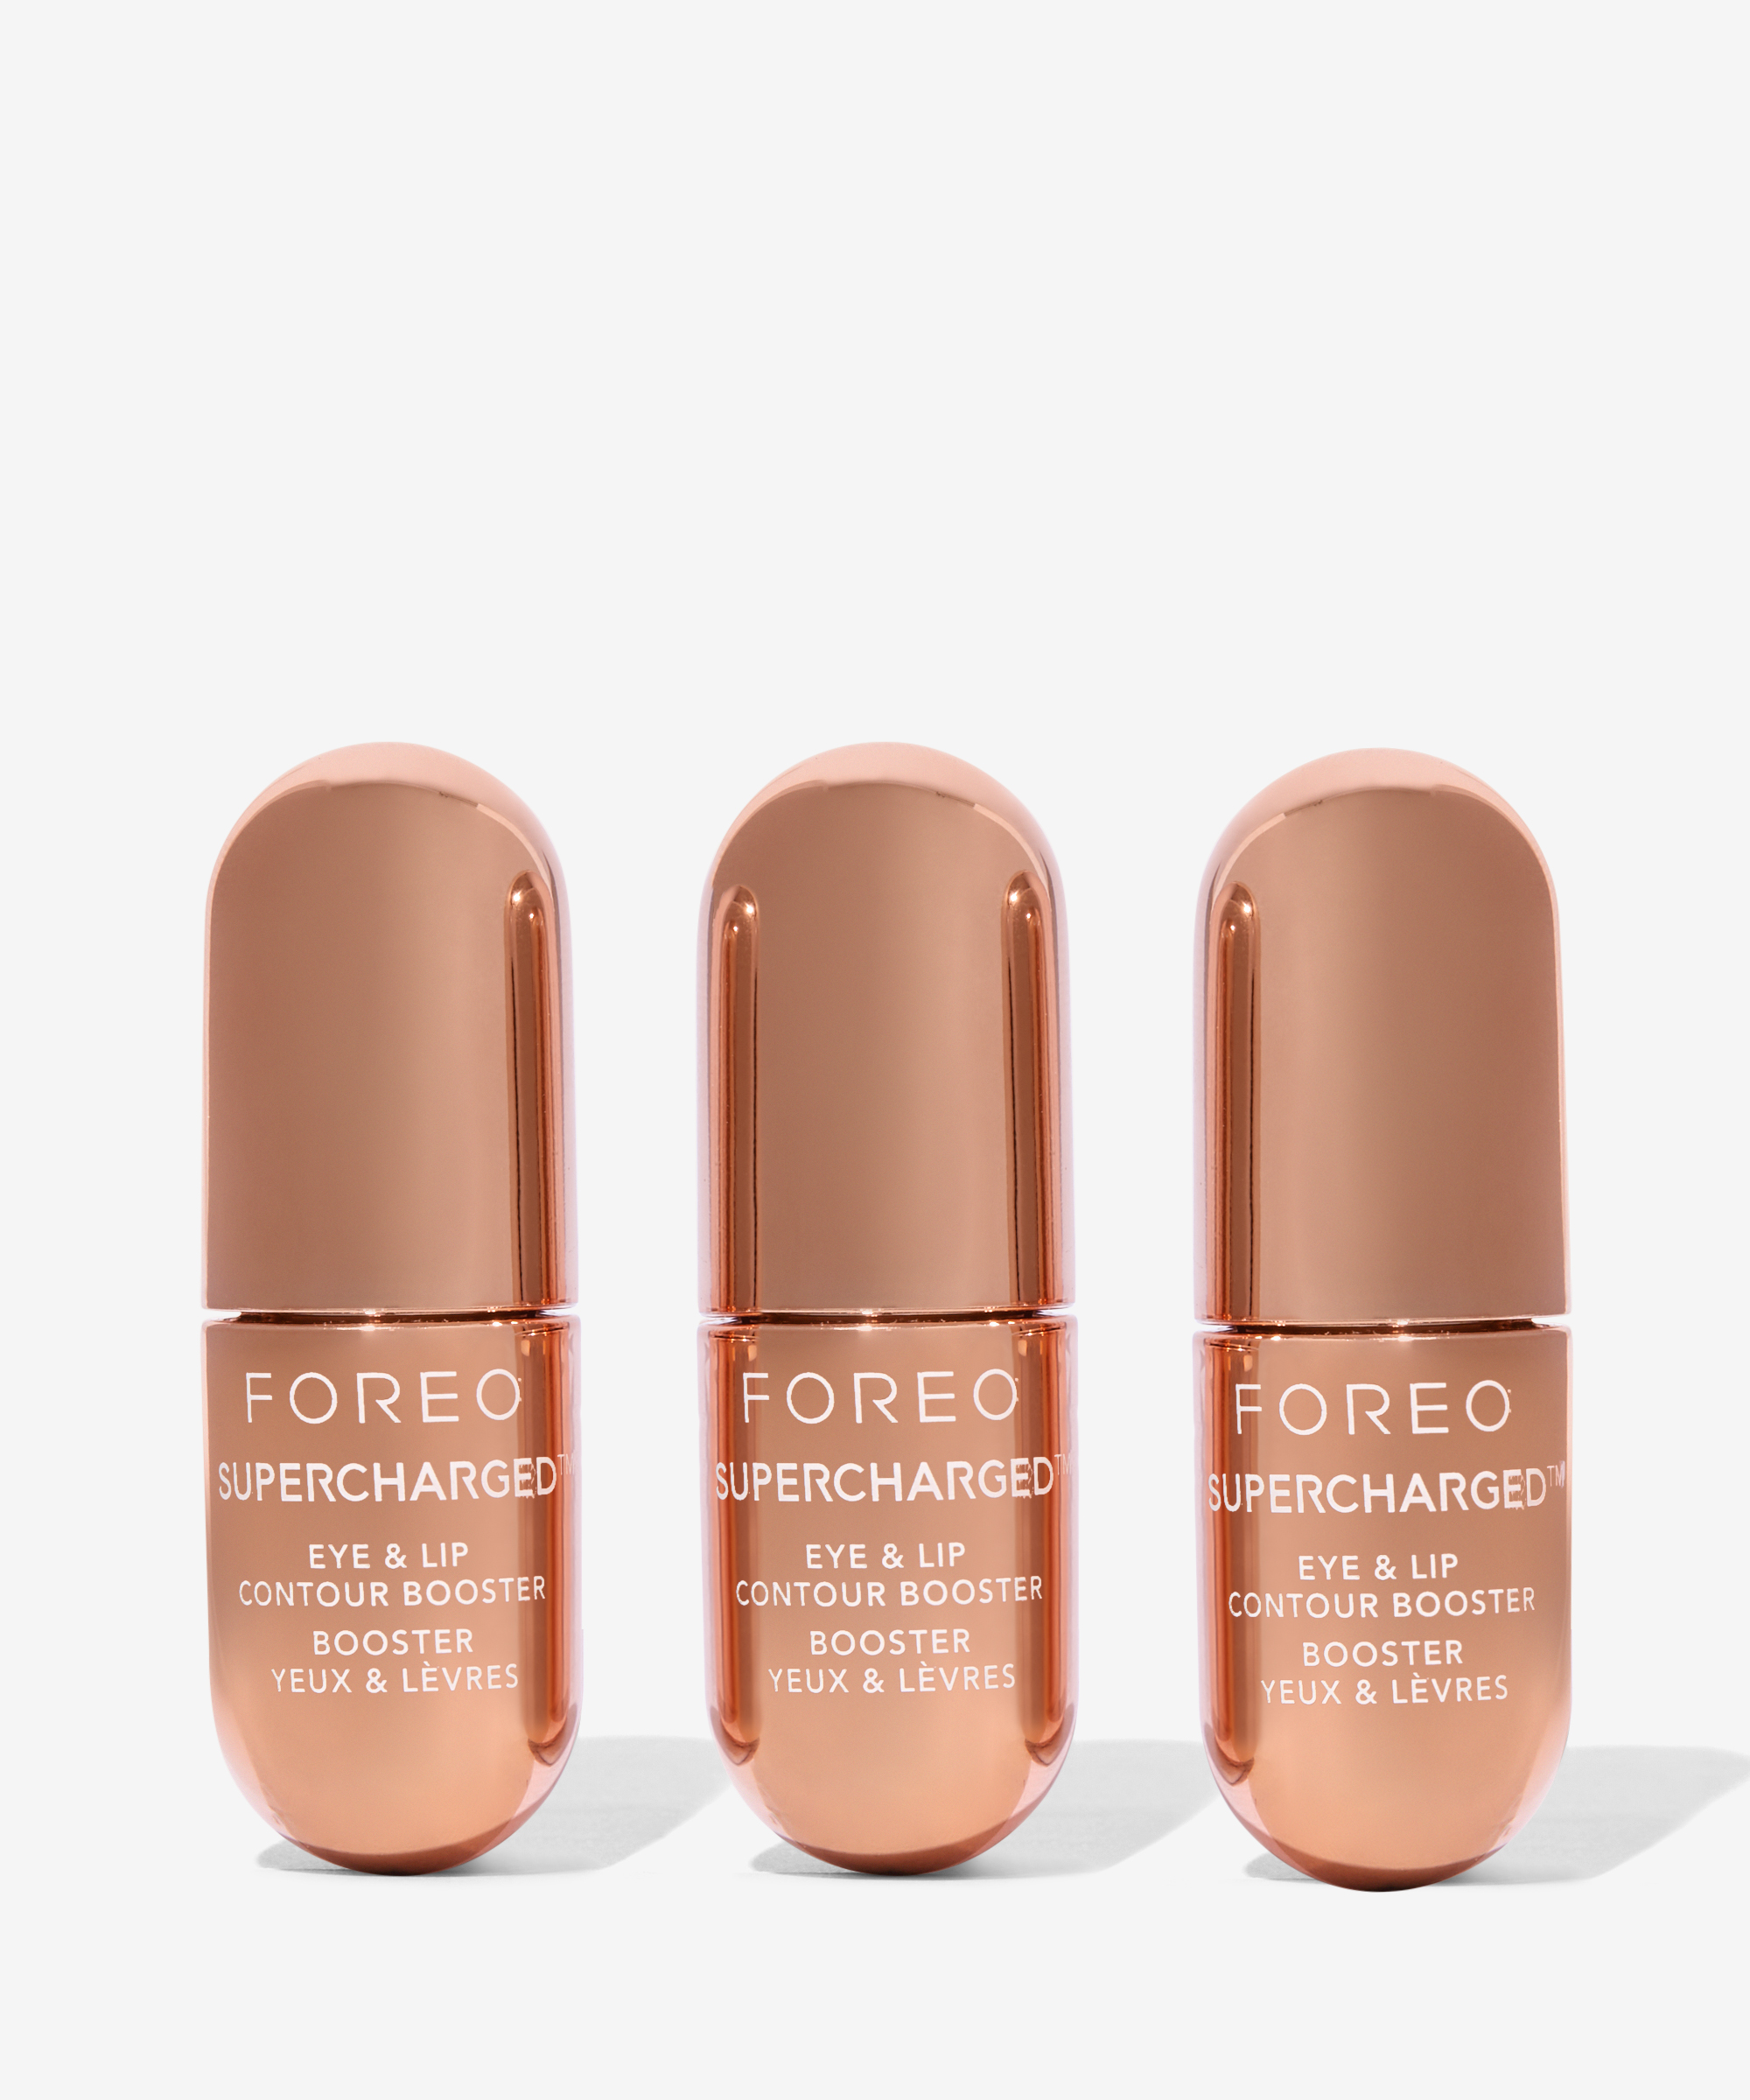 Foreo Supercharged Eye & Lip BAY Contour Booster BEAUTY at